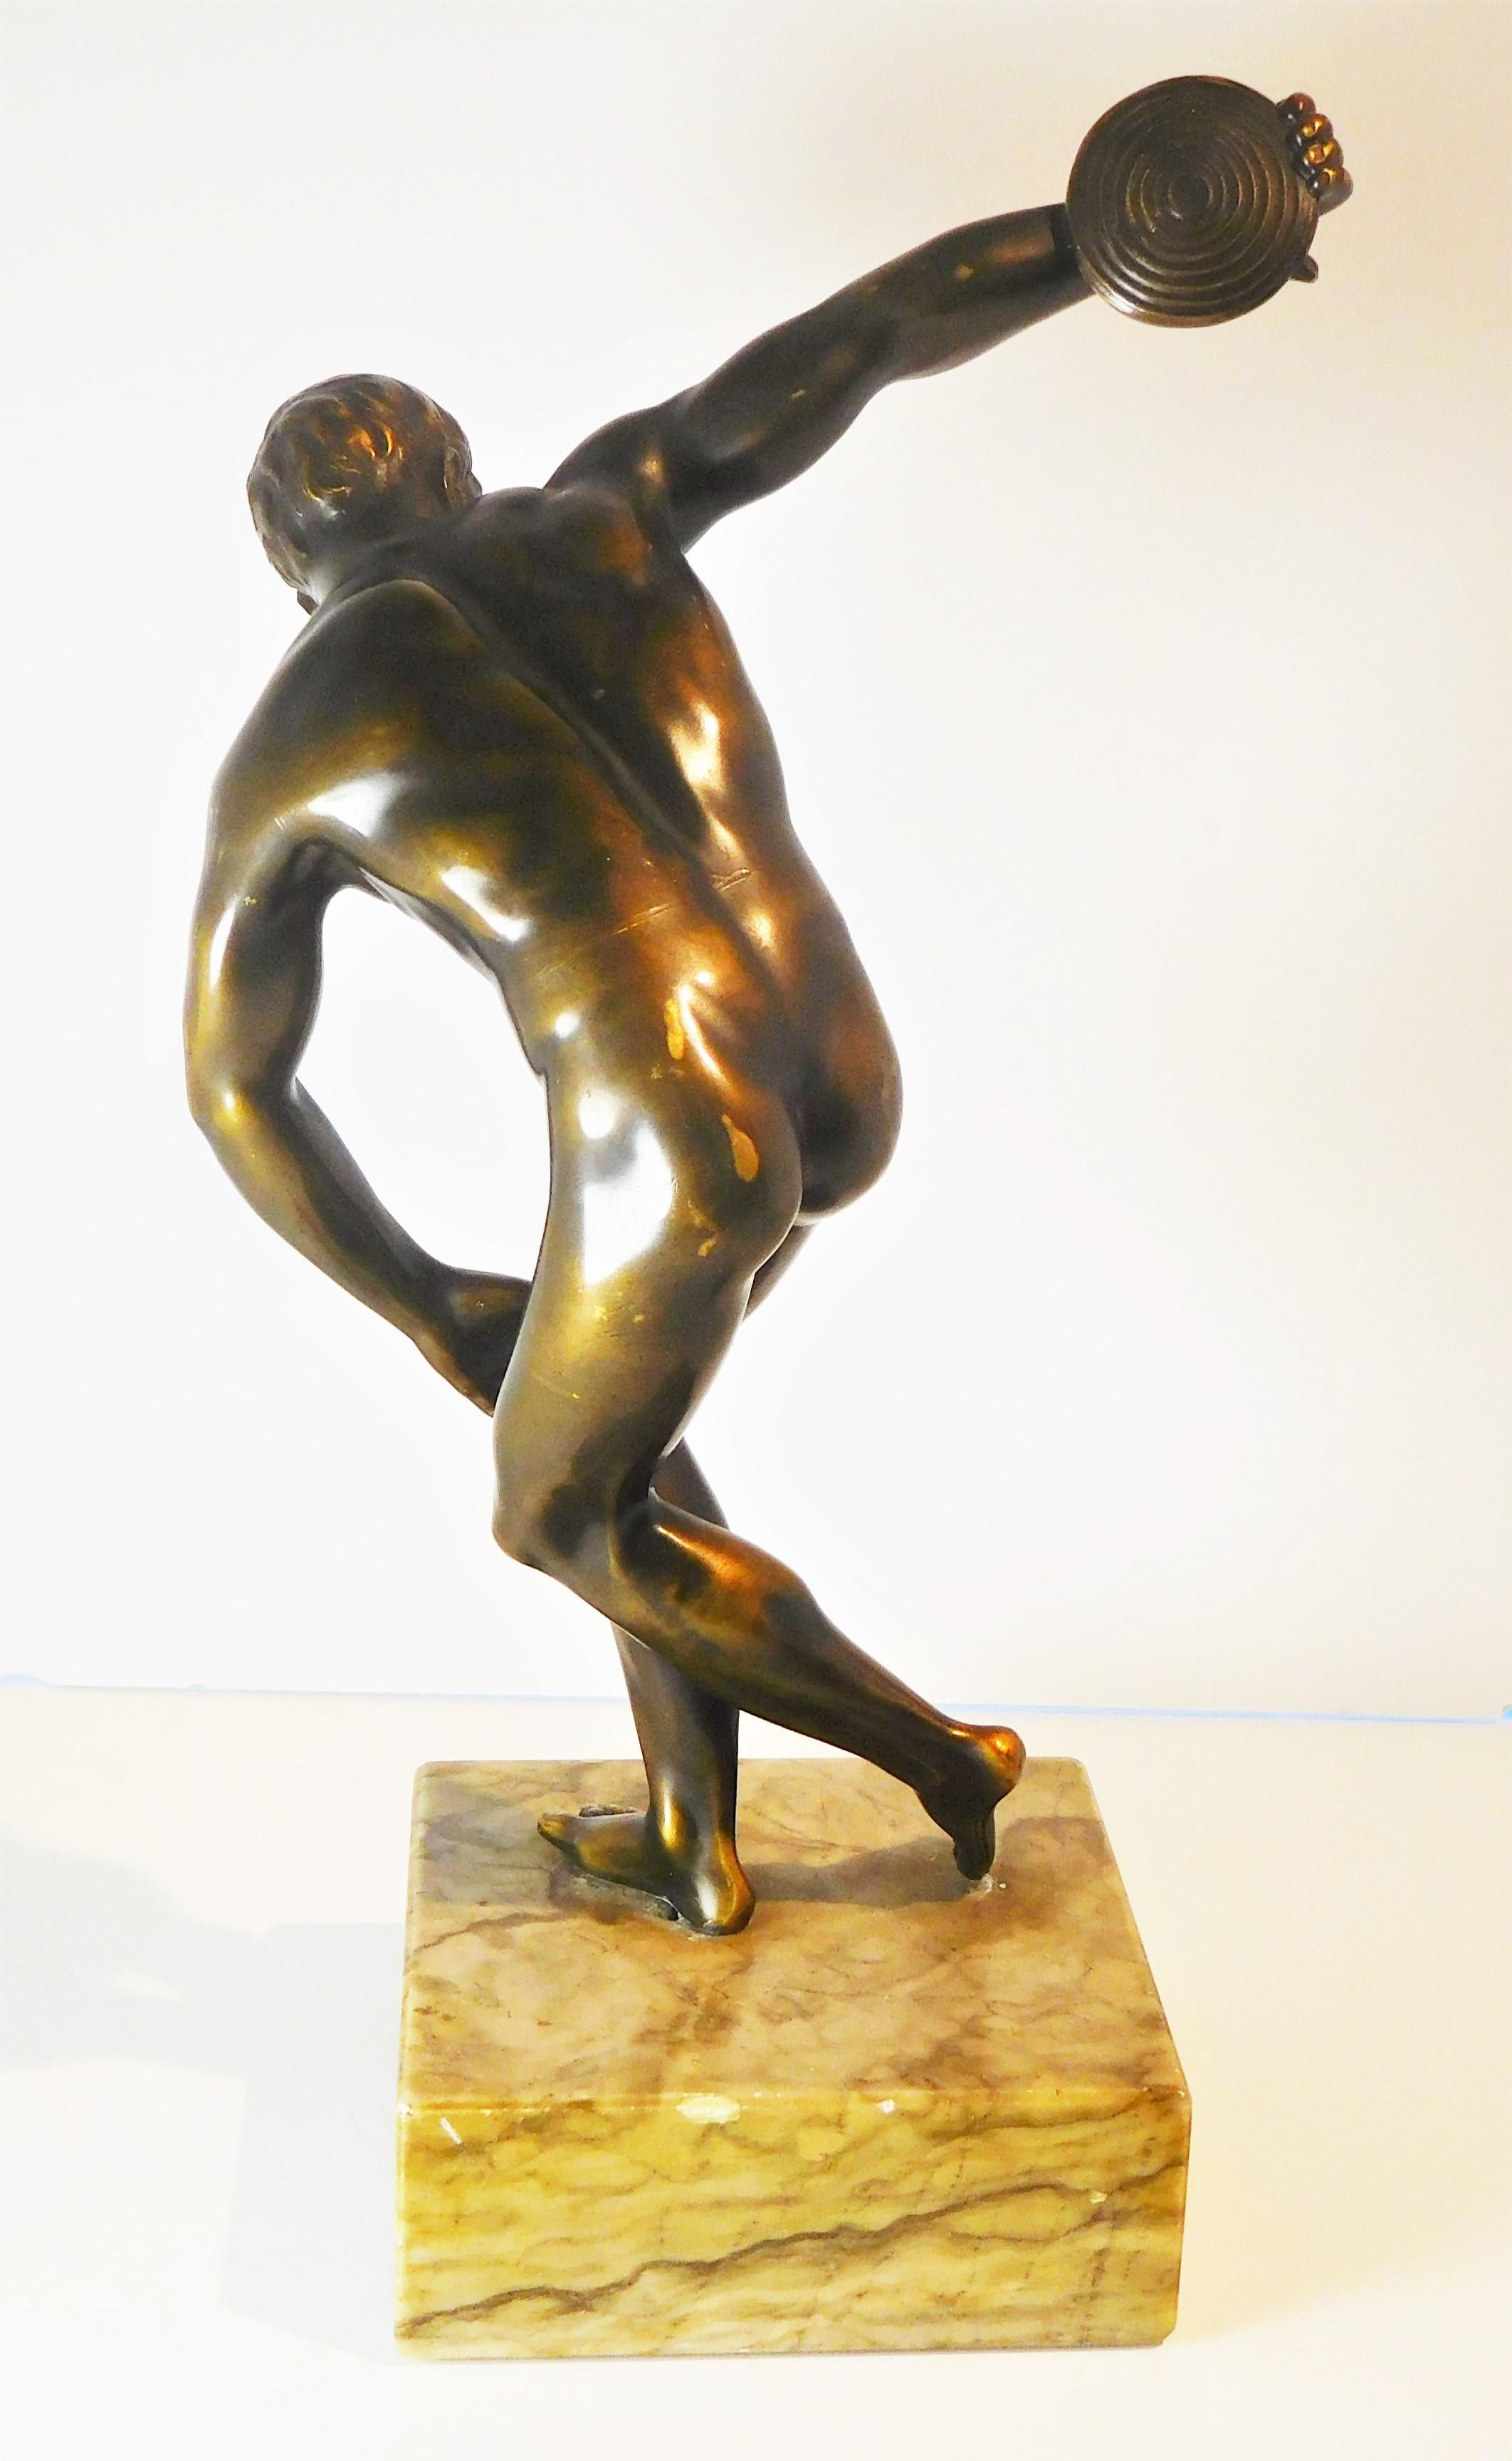 Grand Tour Souvenir Bronze Figure of Discobolus, After the Antique by Myron In Good Condition For Sale In Quechee, VT